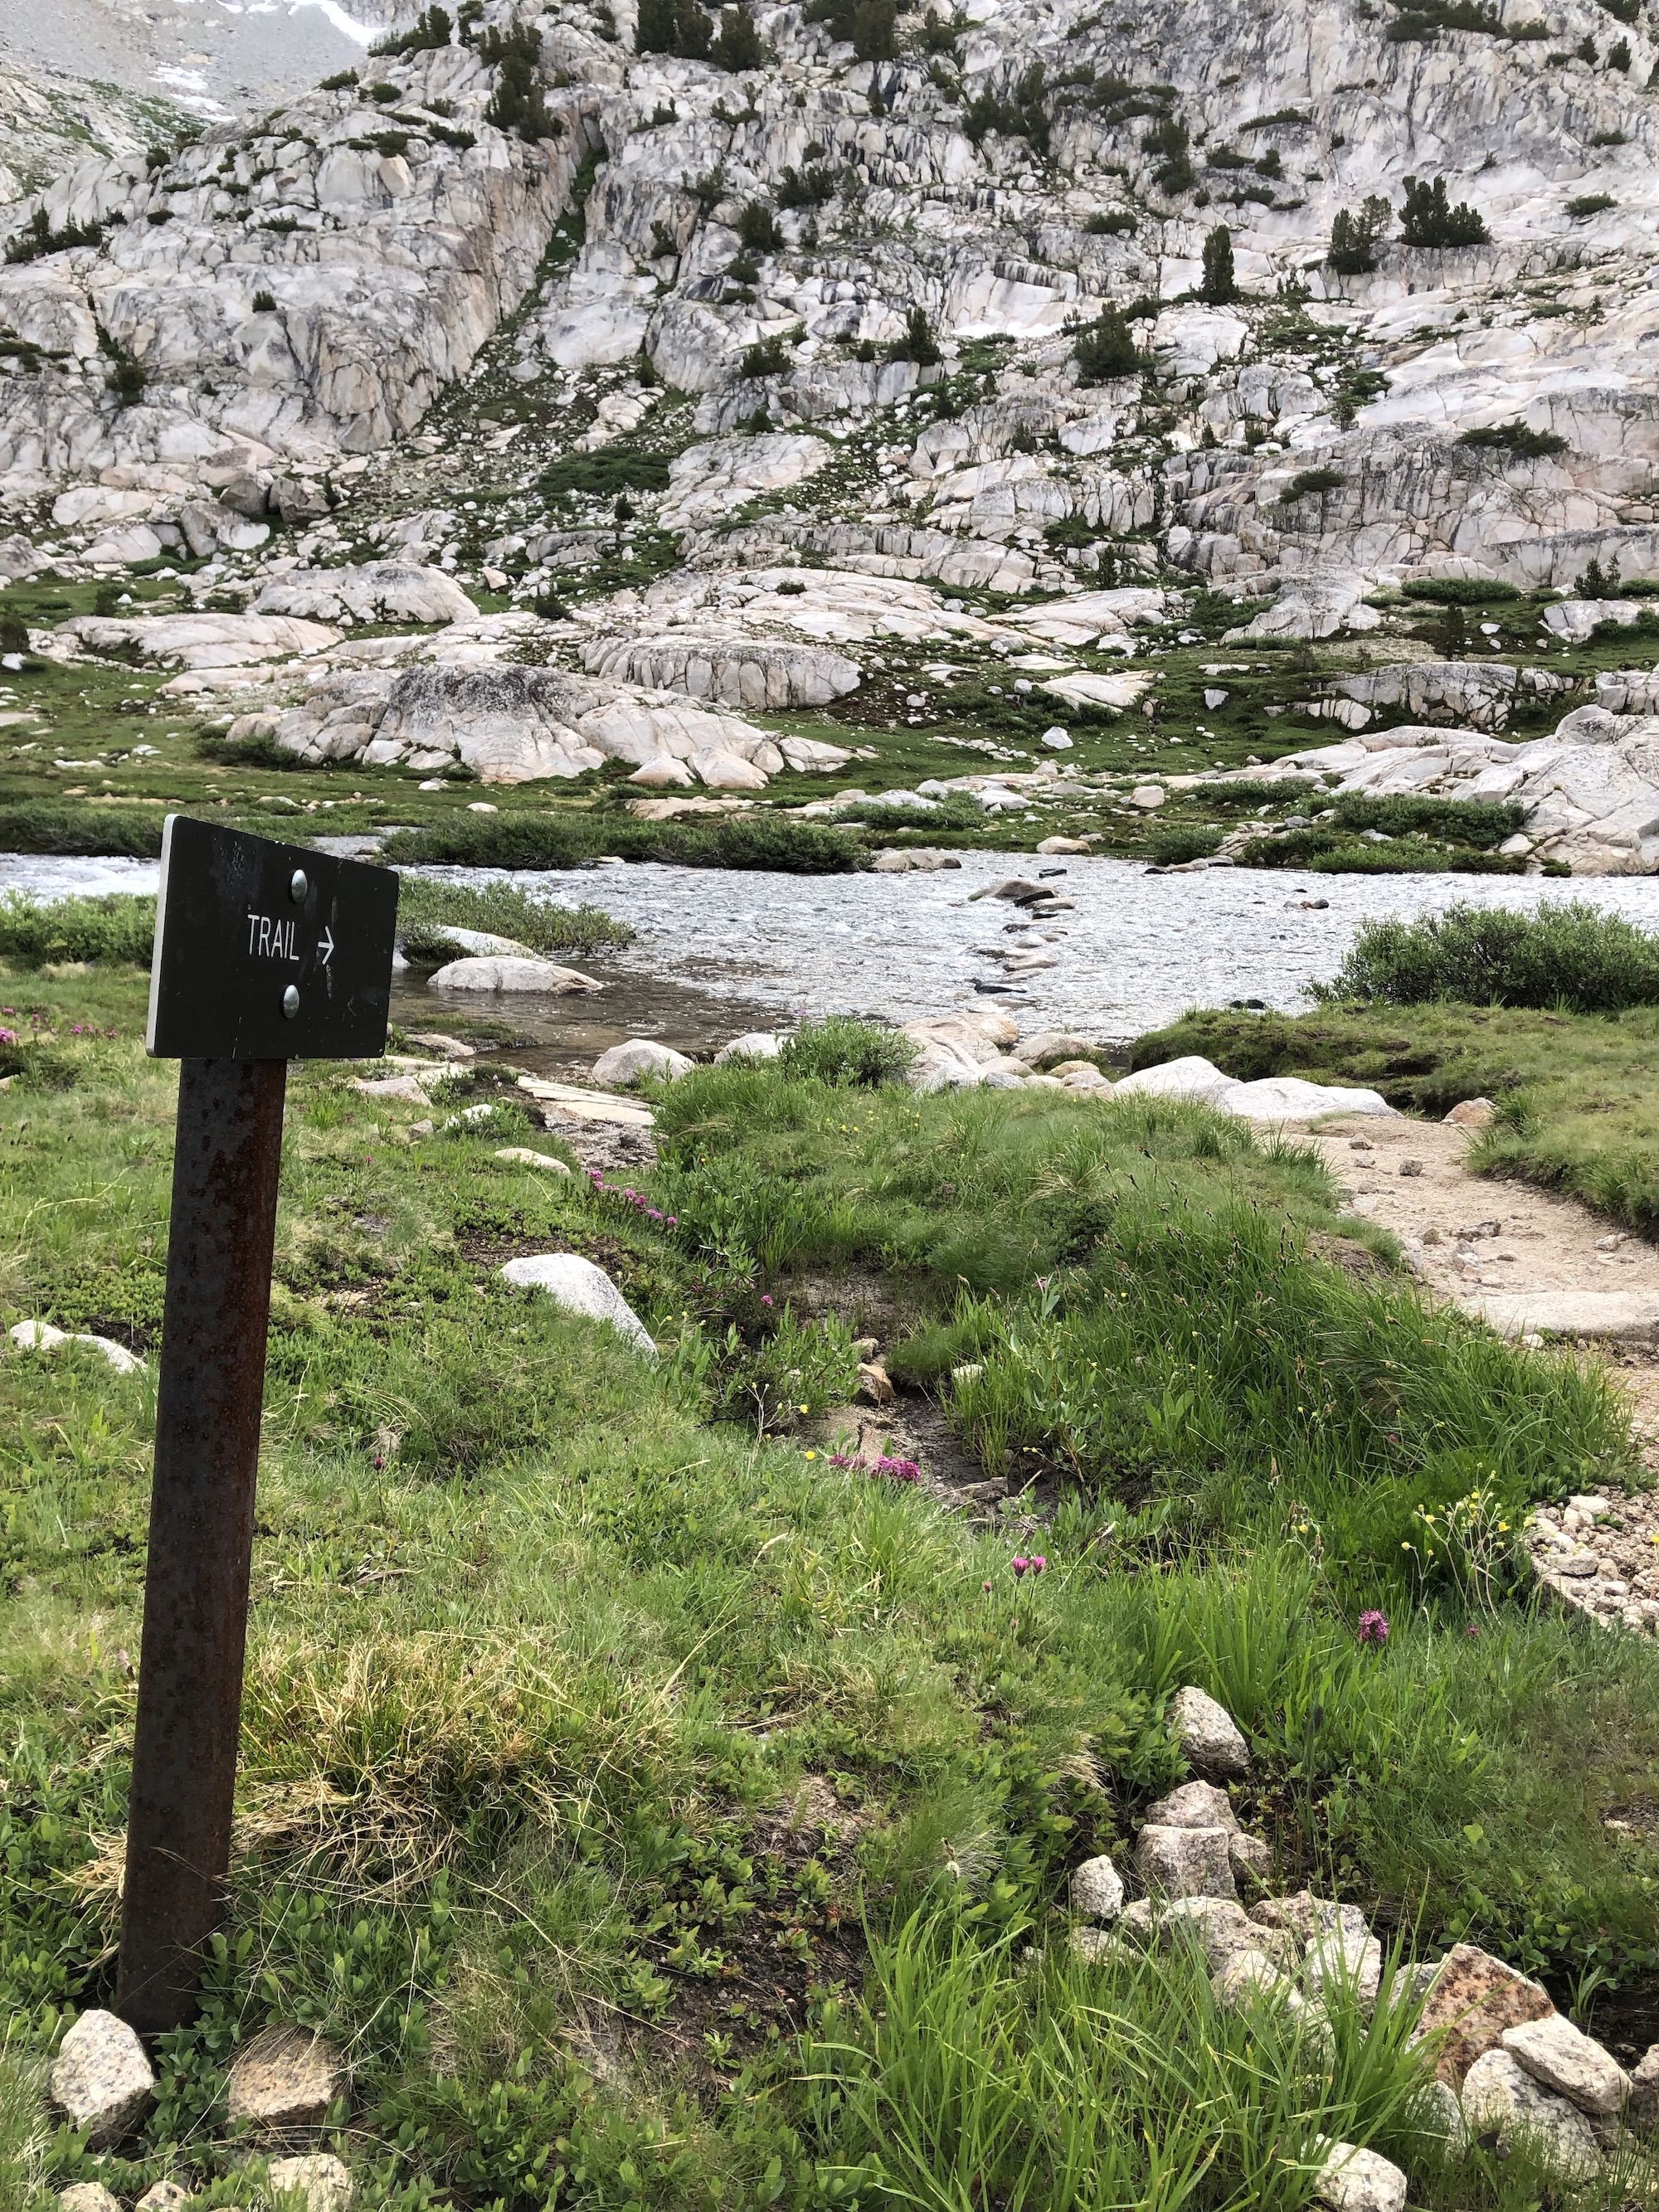 Trail post pointing across a river